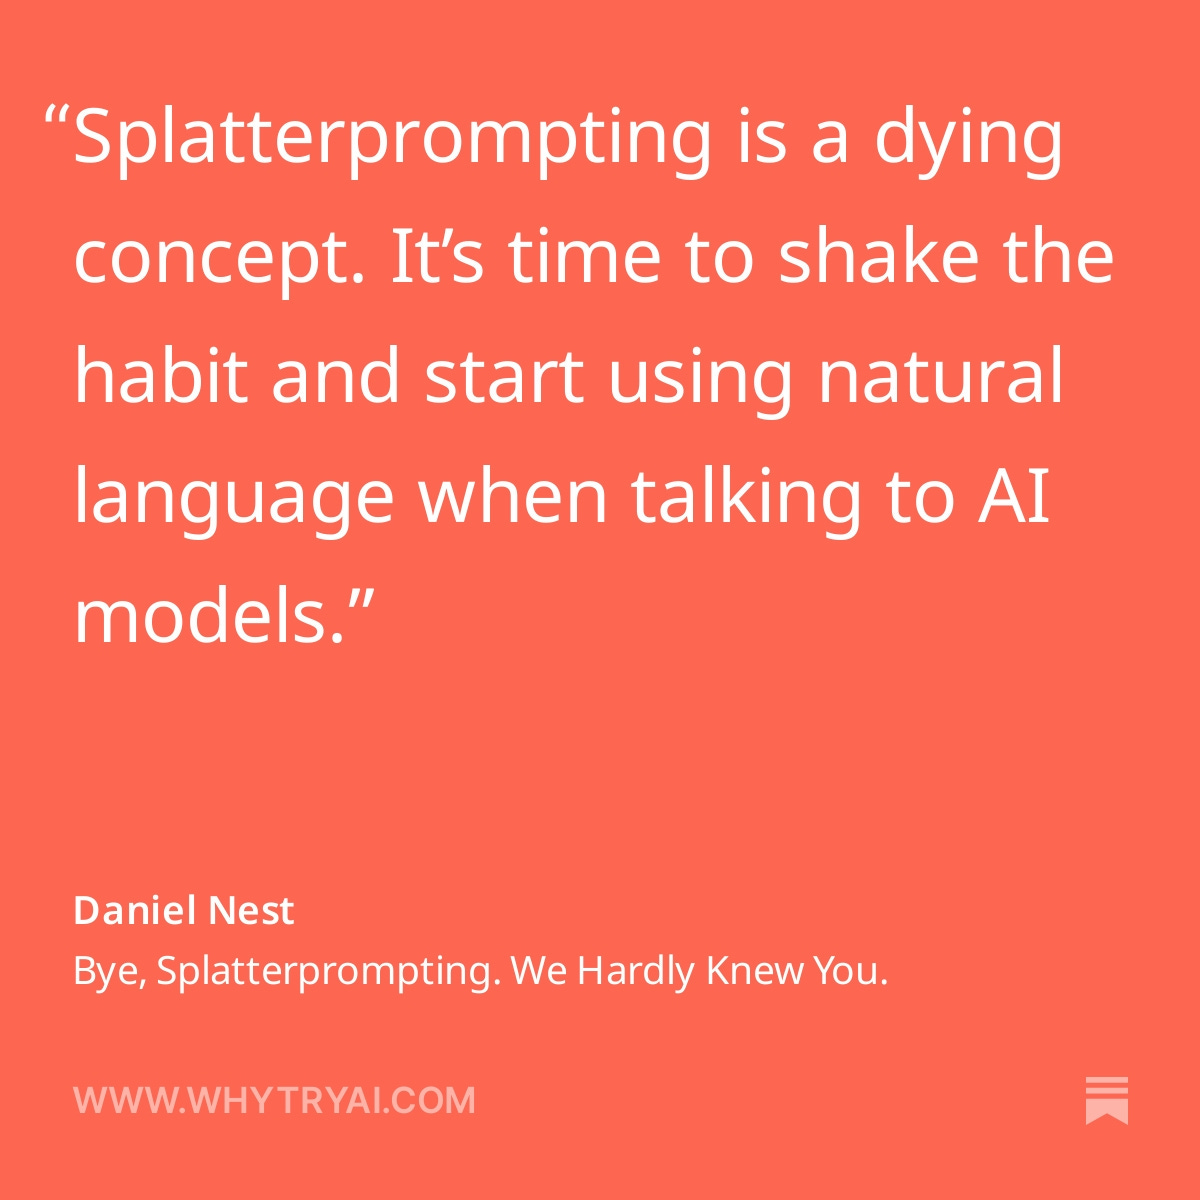 Splatterprompting is a dying concept. It’s time to shake the habit and start using natural language when talking to AI models.